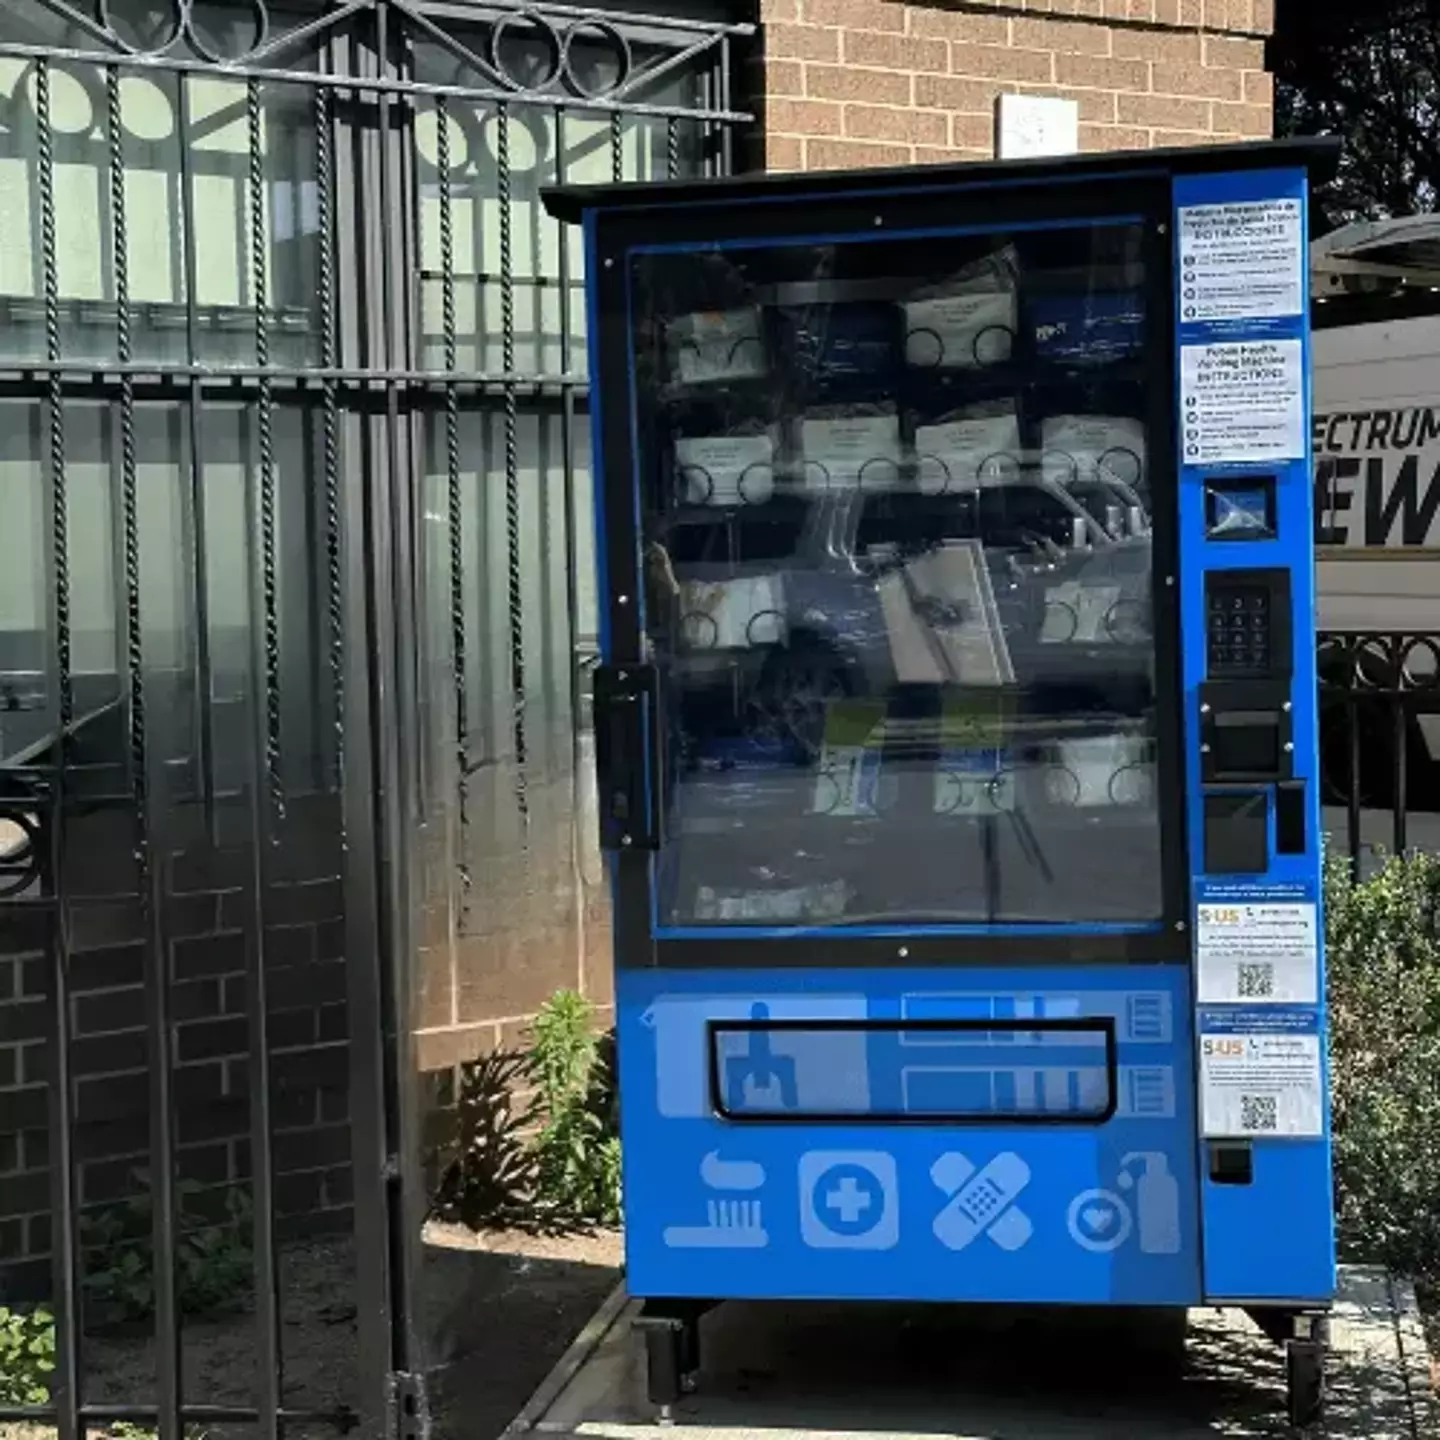 The first public health vending machine was cleared out within twenty four hours.